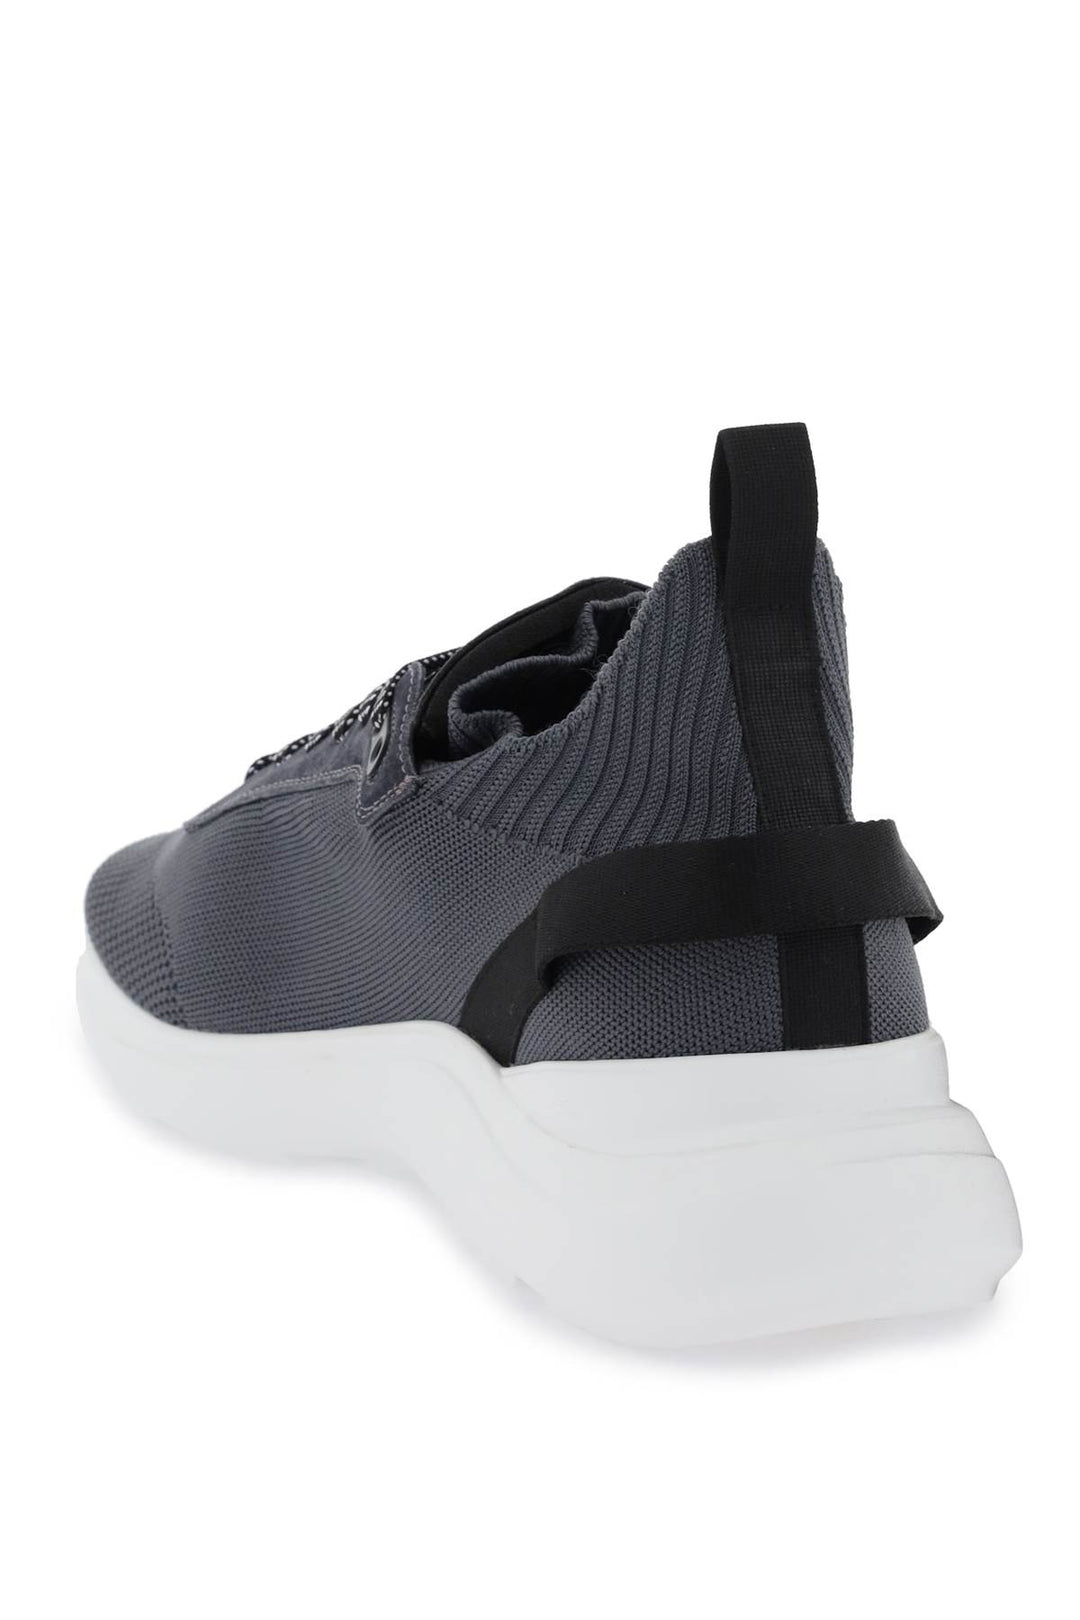 Dsquared2 Fly Sneakers   Grey